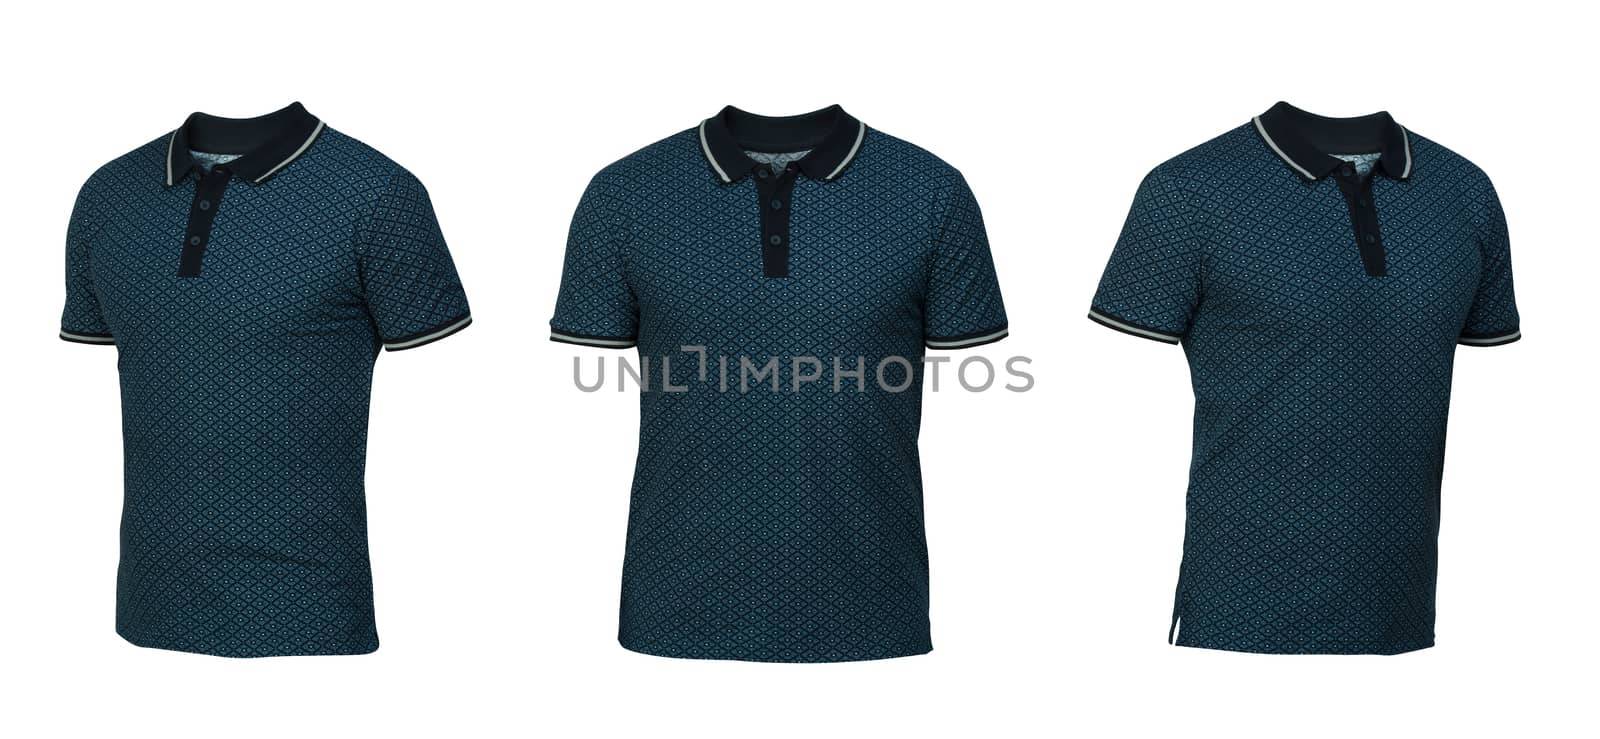 blue polo shirt with square ornament. t-shirt front view three positions on a white background